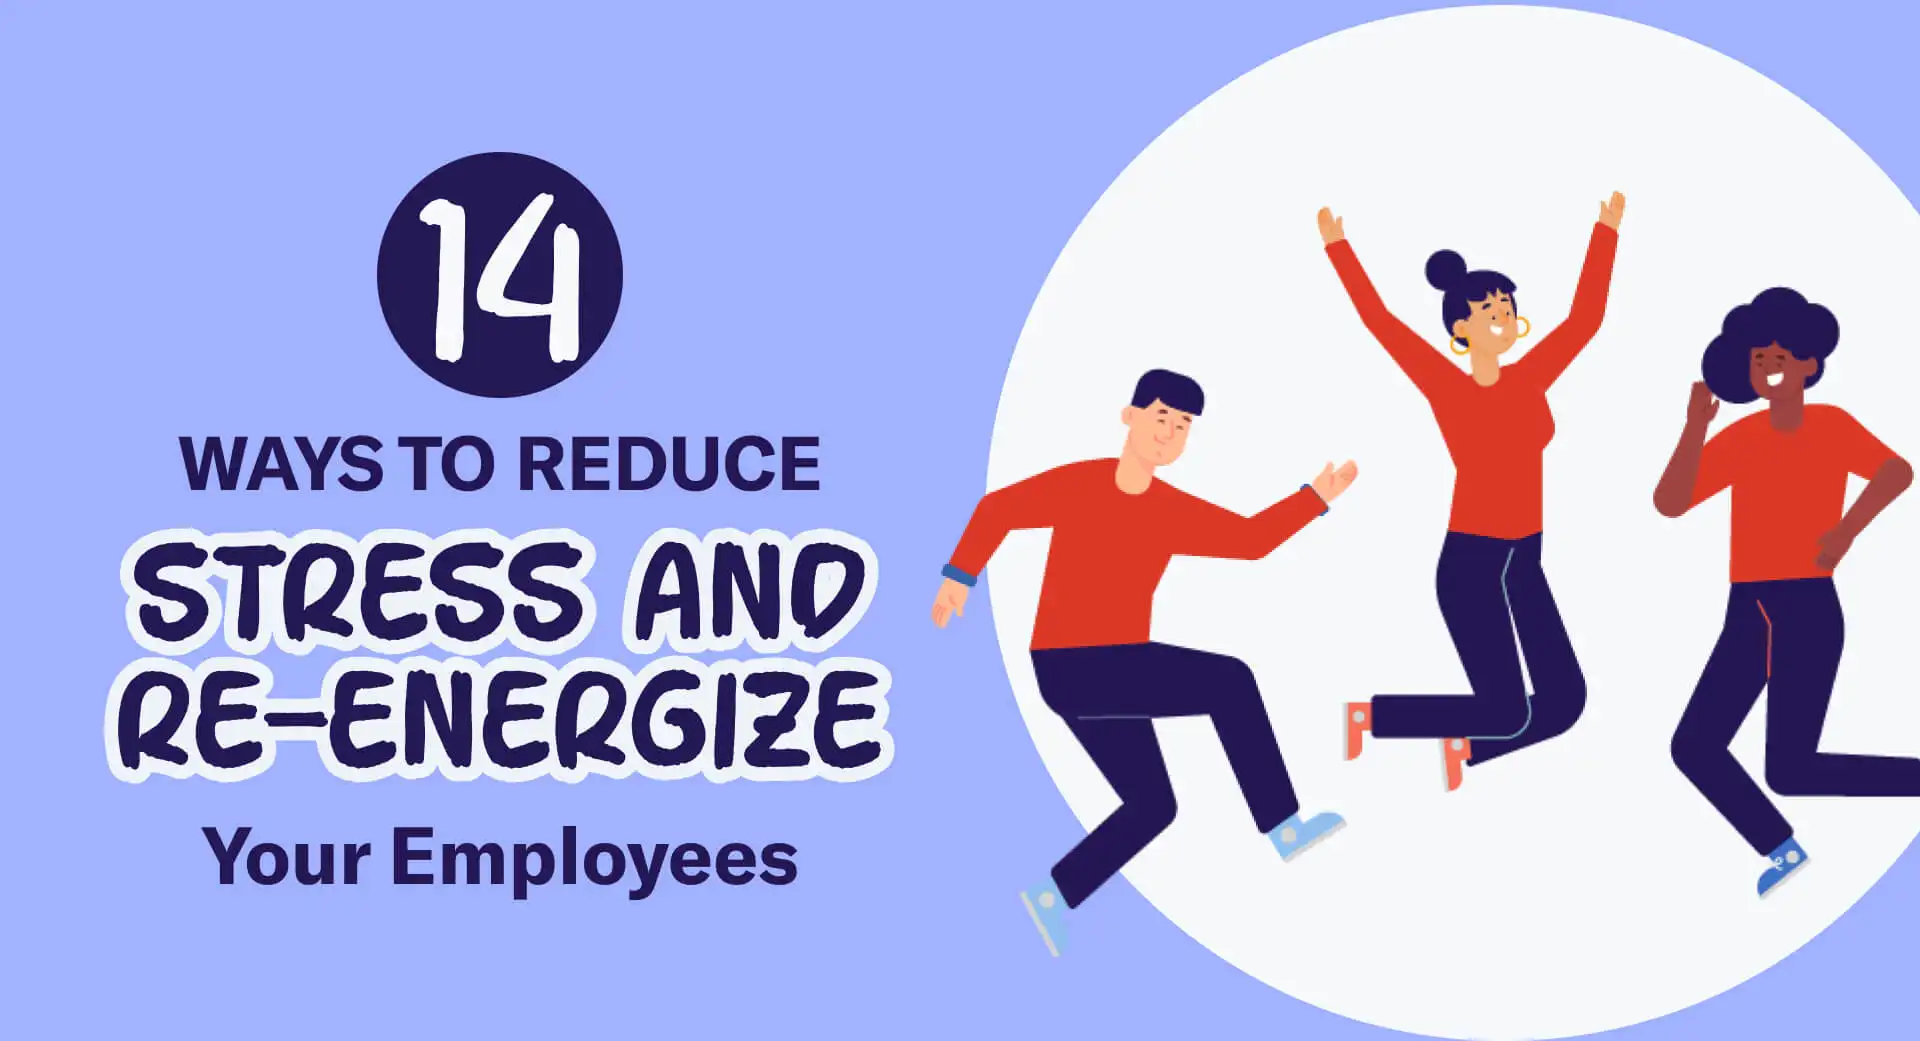 14-Ways-To-Reduce-Stress-and-Re-energize-Your-Employees